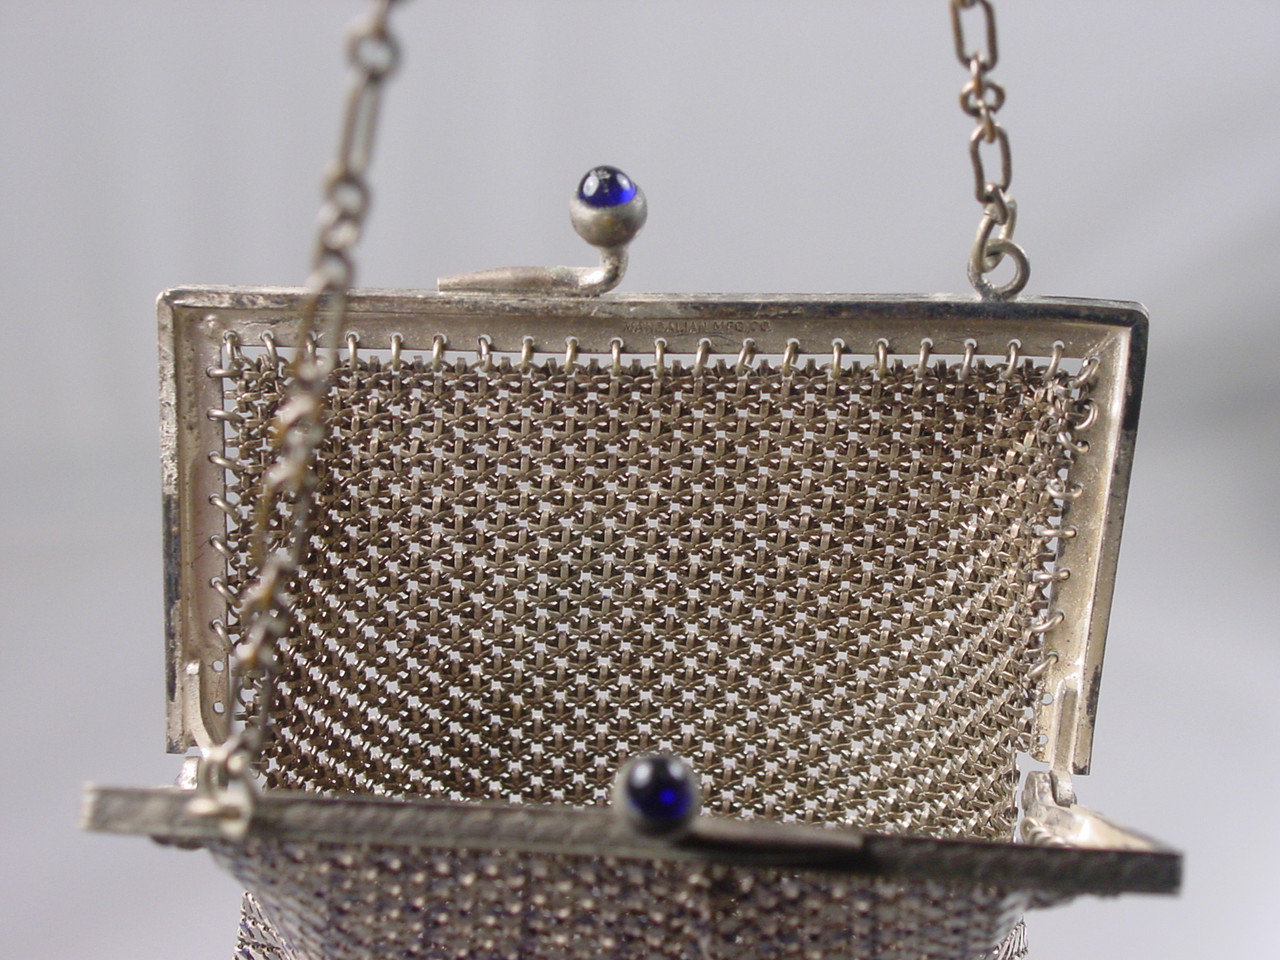 Buy Vintage German Silver Purse Chain Mail Purse Online in India - Etsy